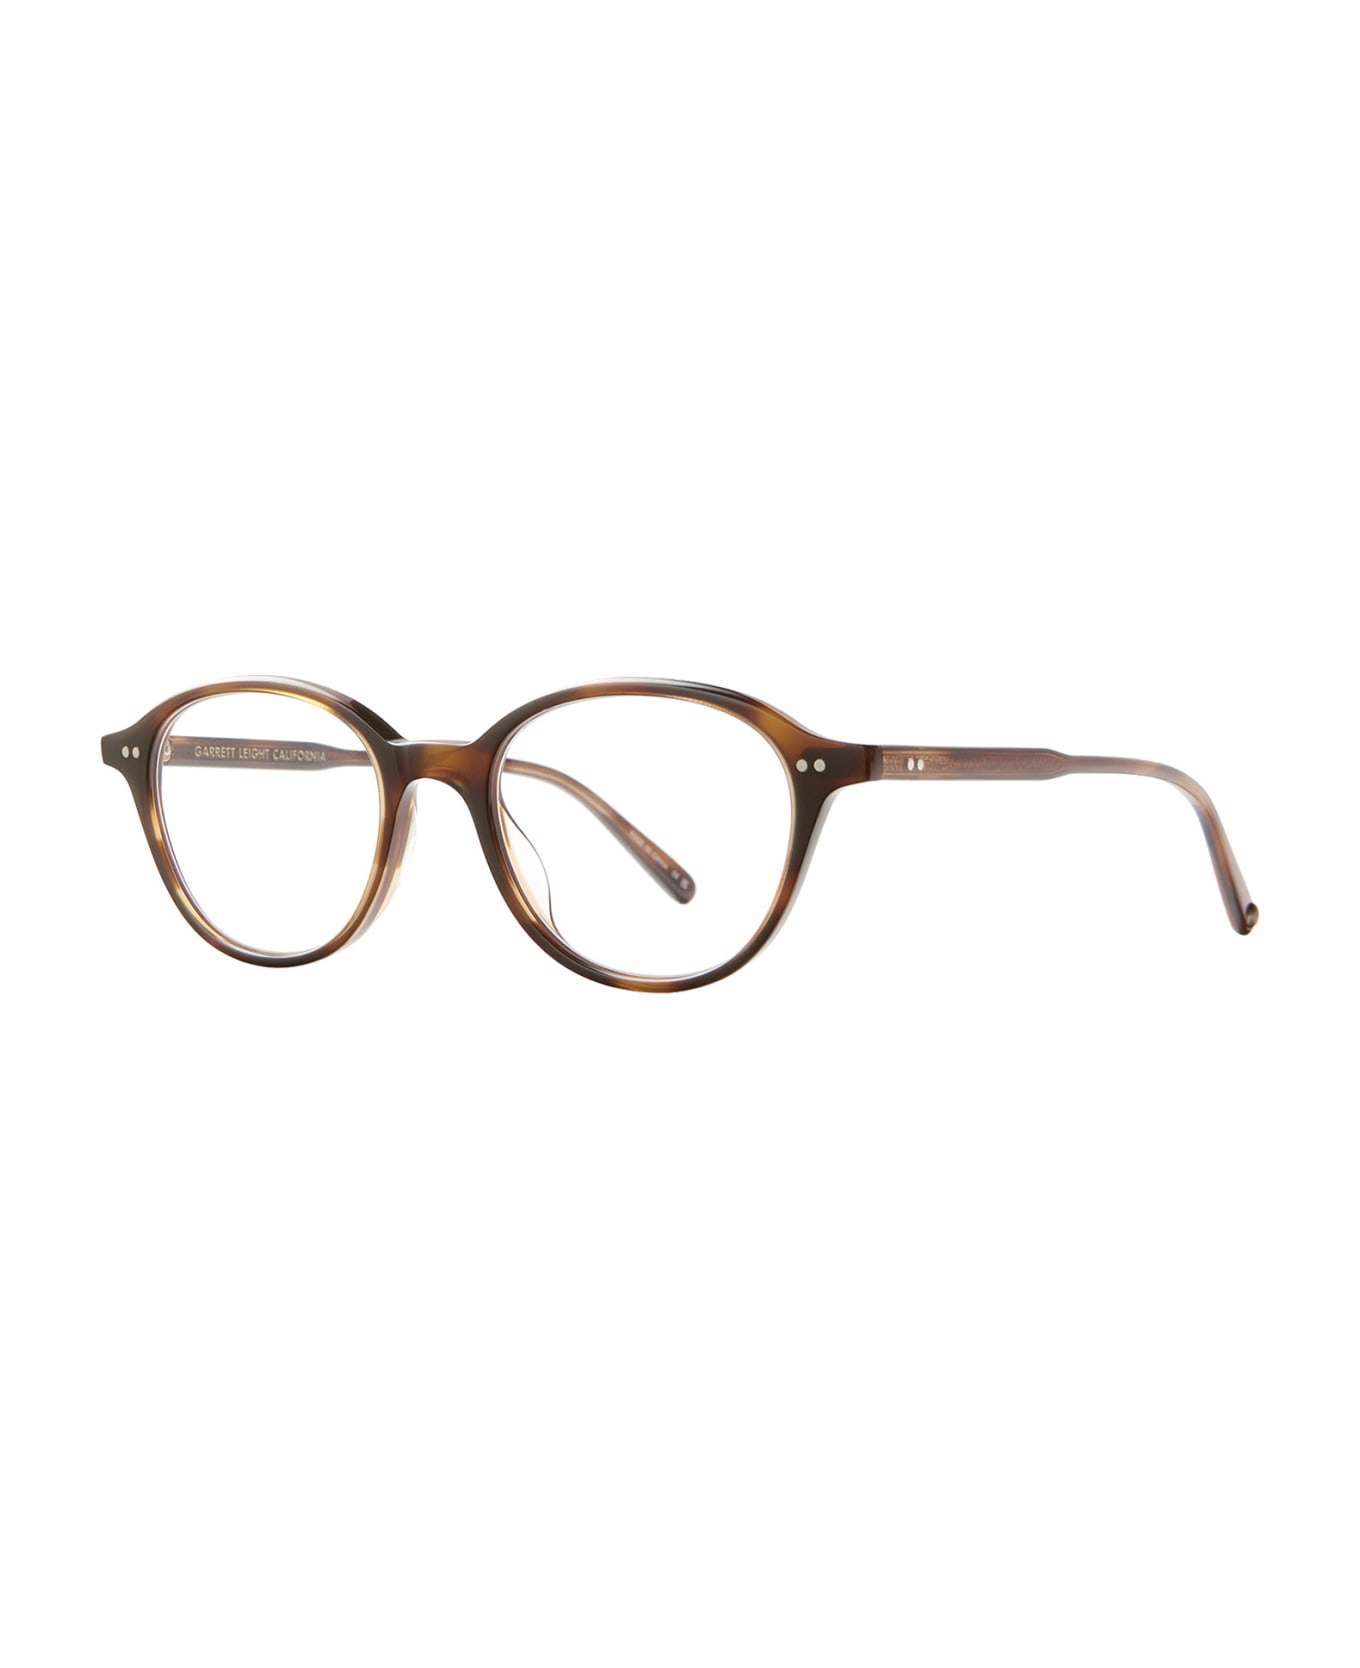 Garrett Leight Franklin Spotted Brown Shell Glasses - Spotted Brown Shell